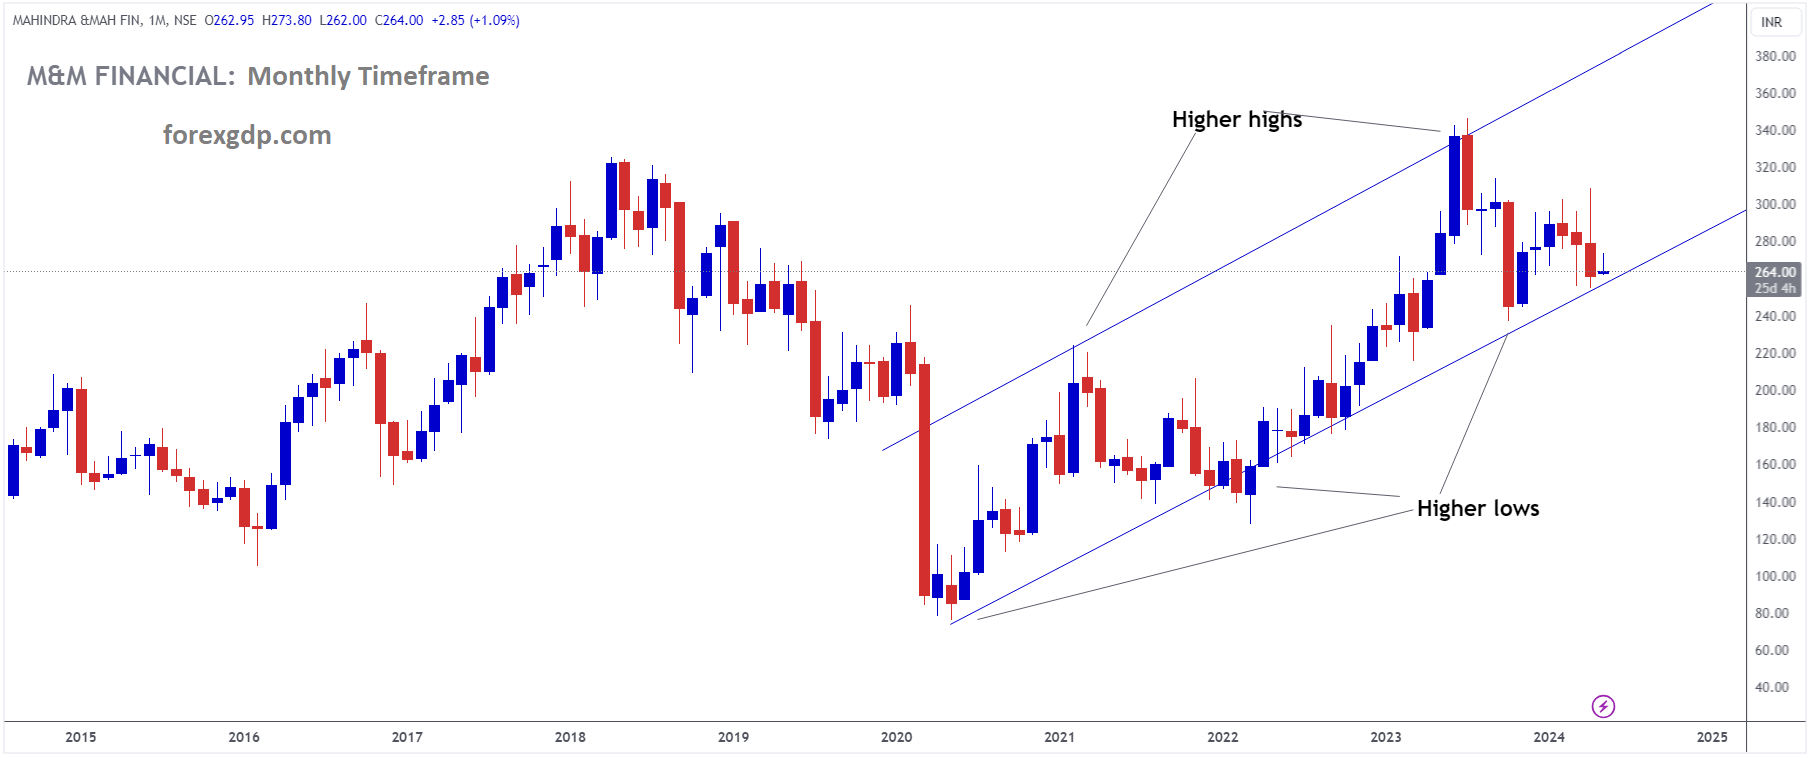 MAHINDRA & MAH FIN Market price is moving in Ascending channel and market has reached higher low area of the channel